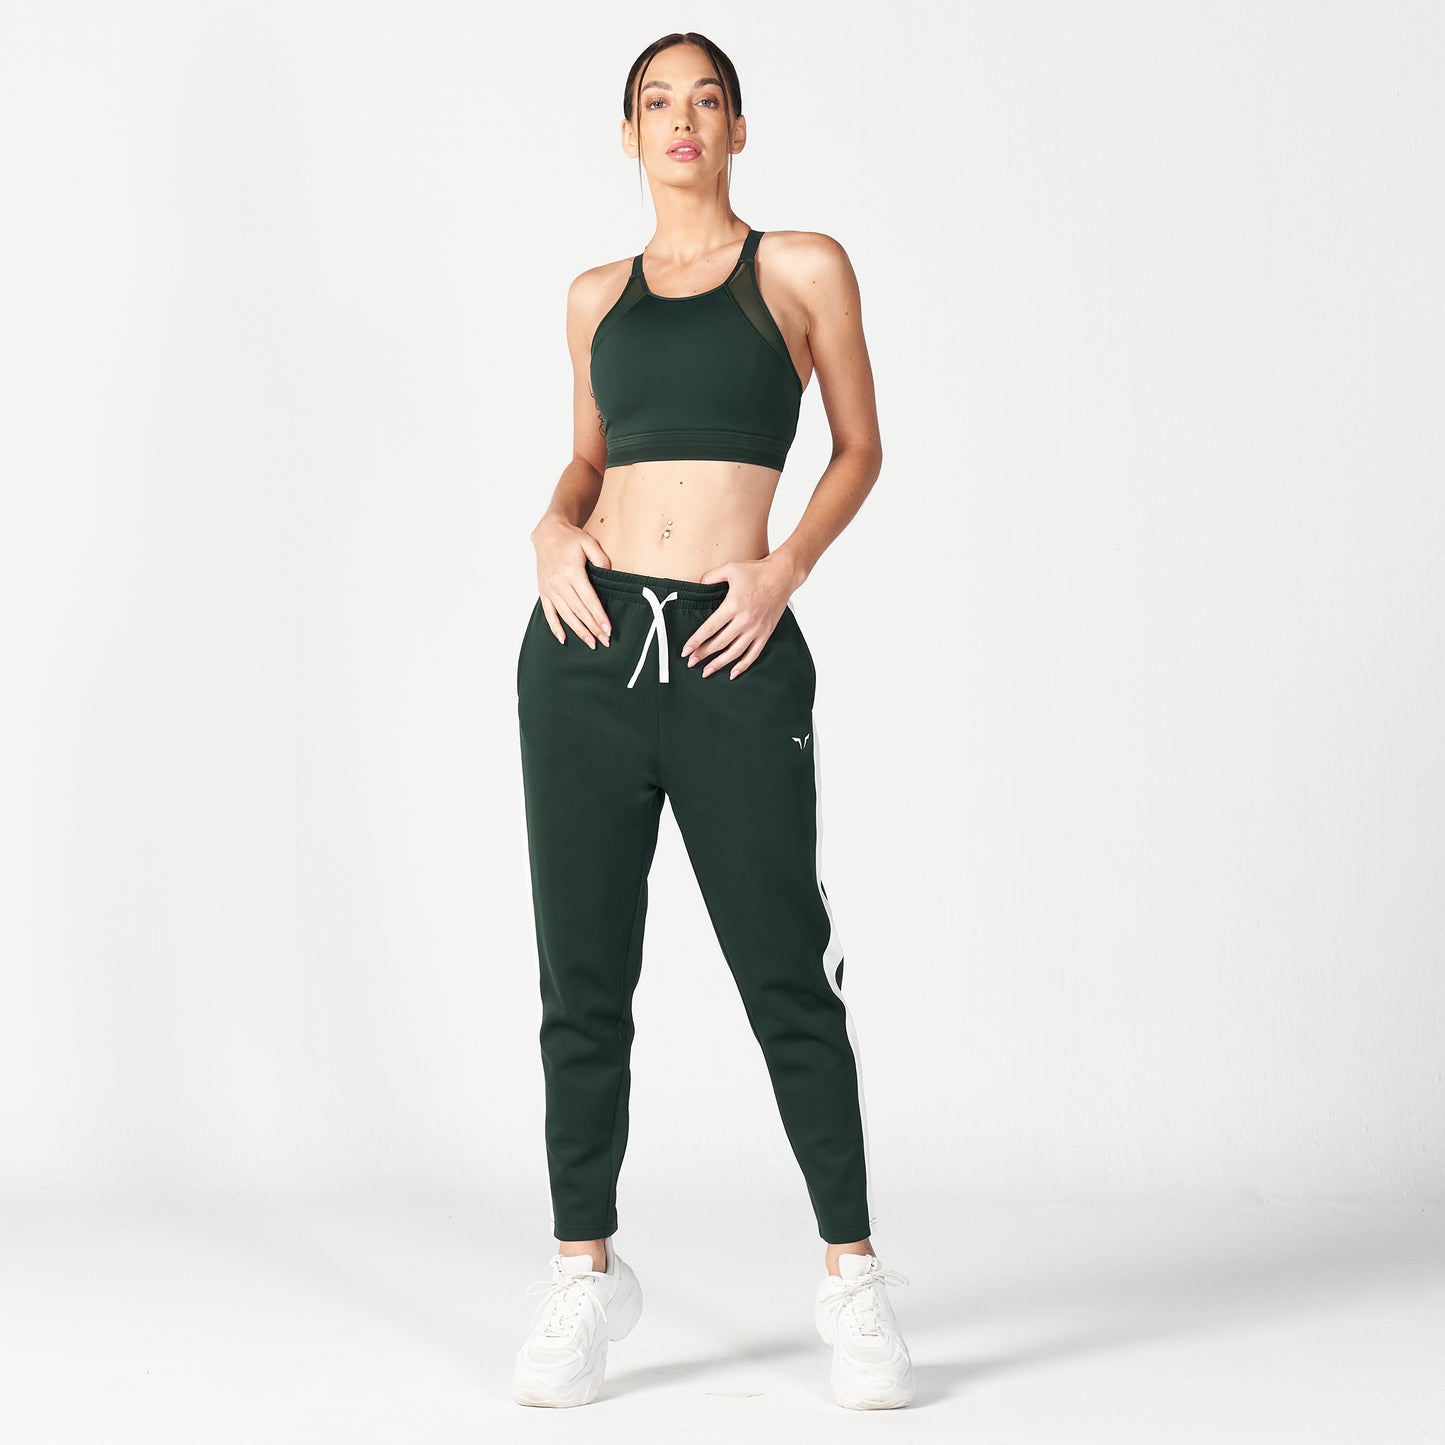 squatwolf-workout-clothes-core-tapered-pants-green-gym-pants-for-women